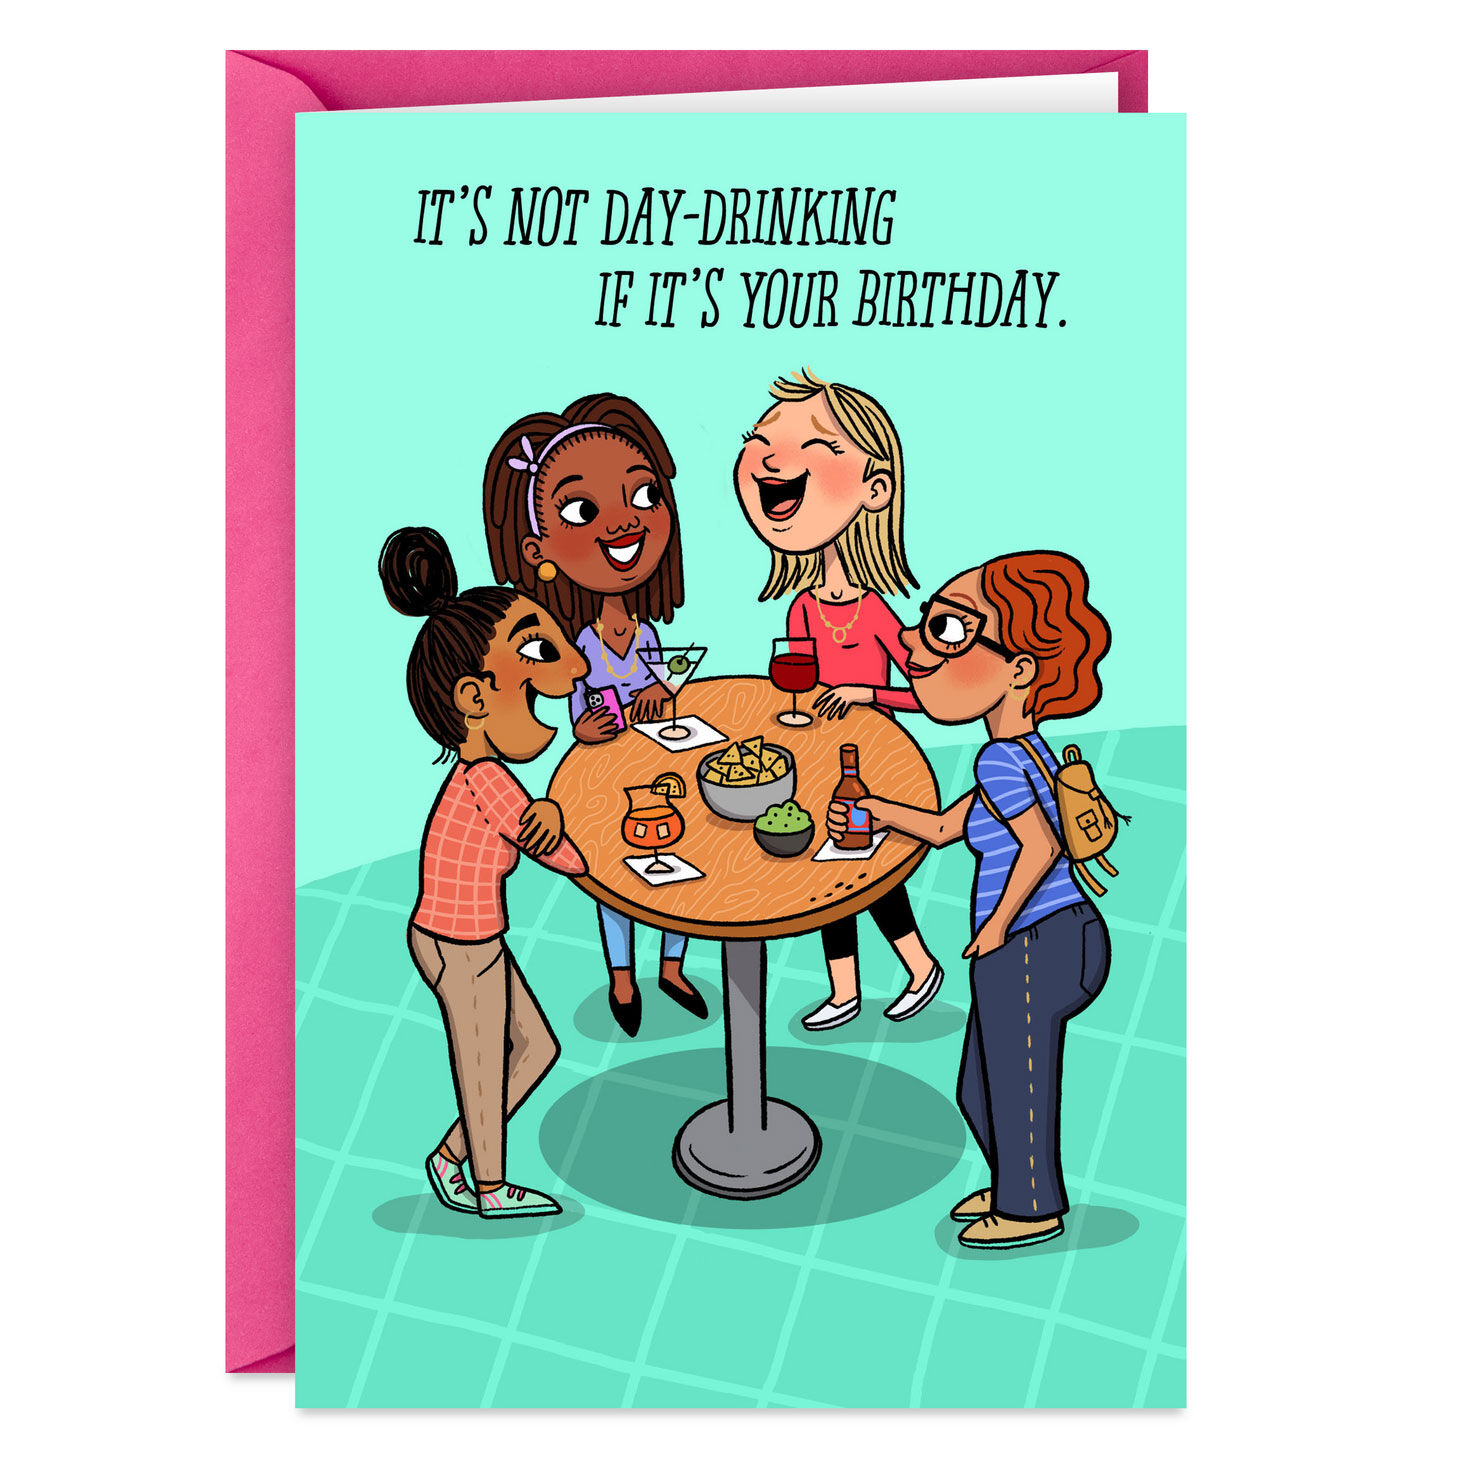 Day-Drinking Funny Birthday Card for Her for only USD 3.69 | Hallmark